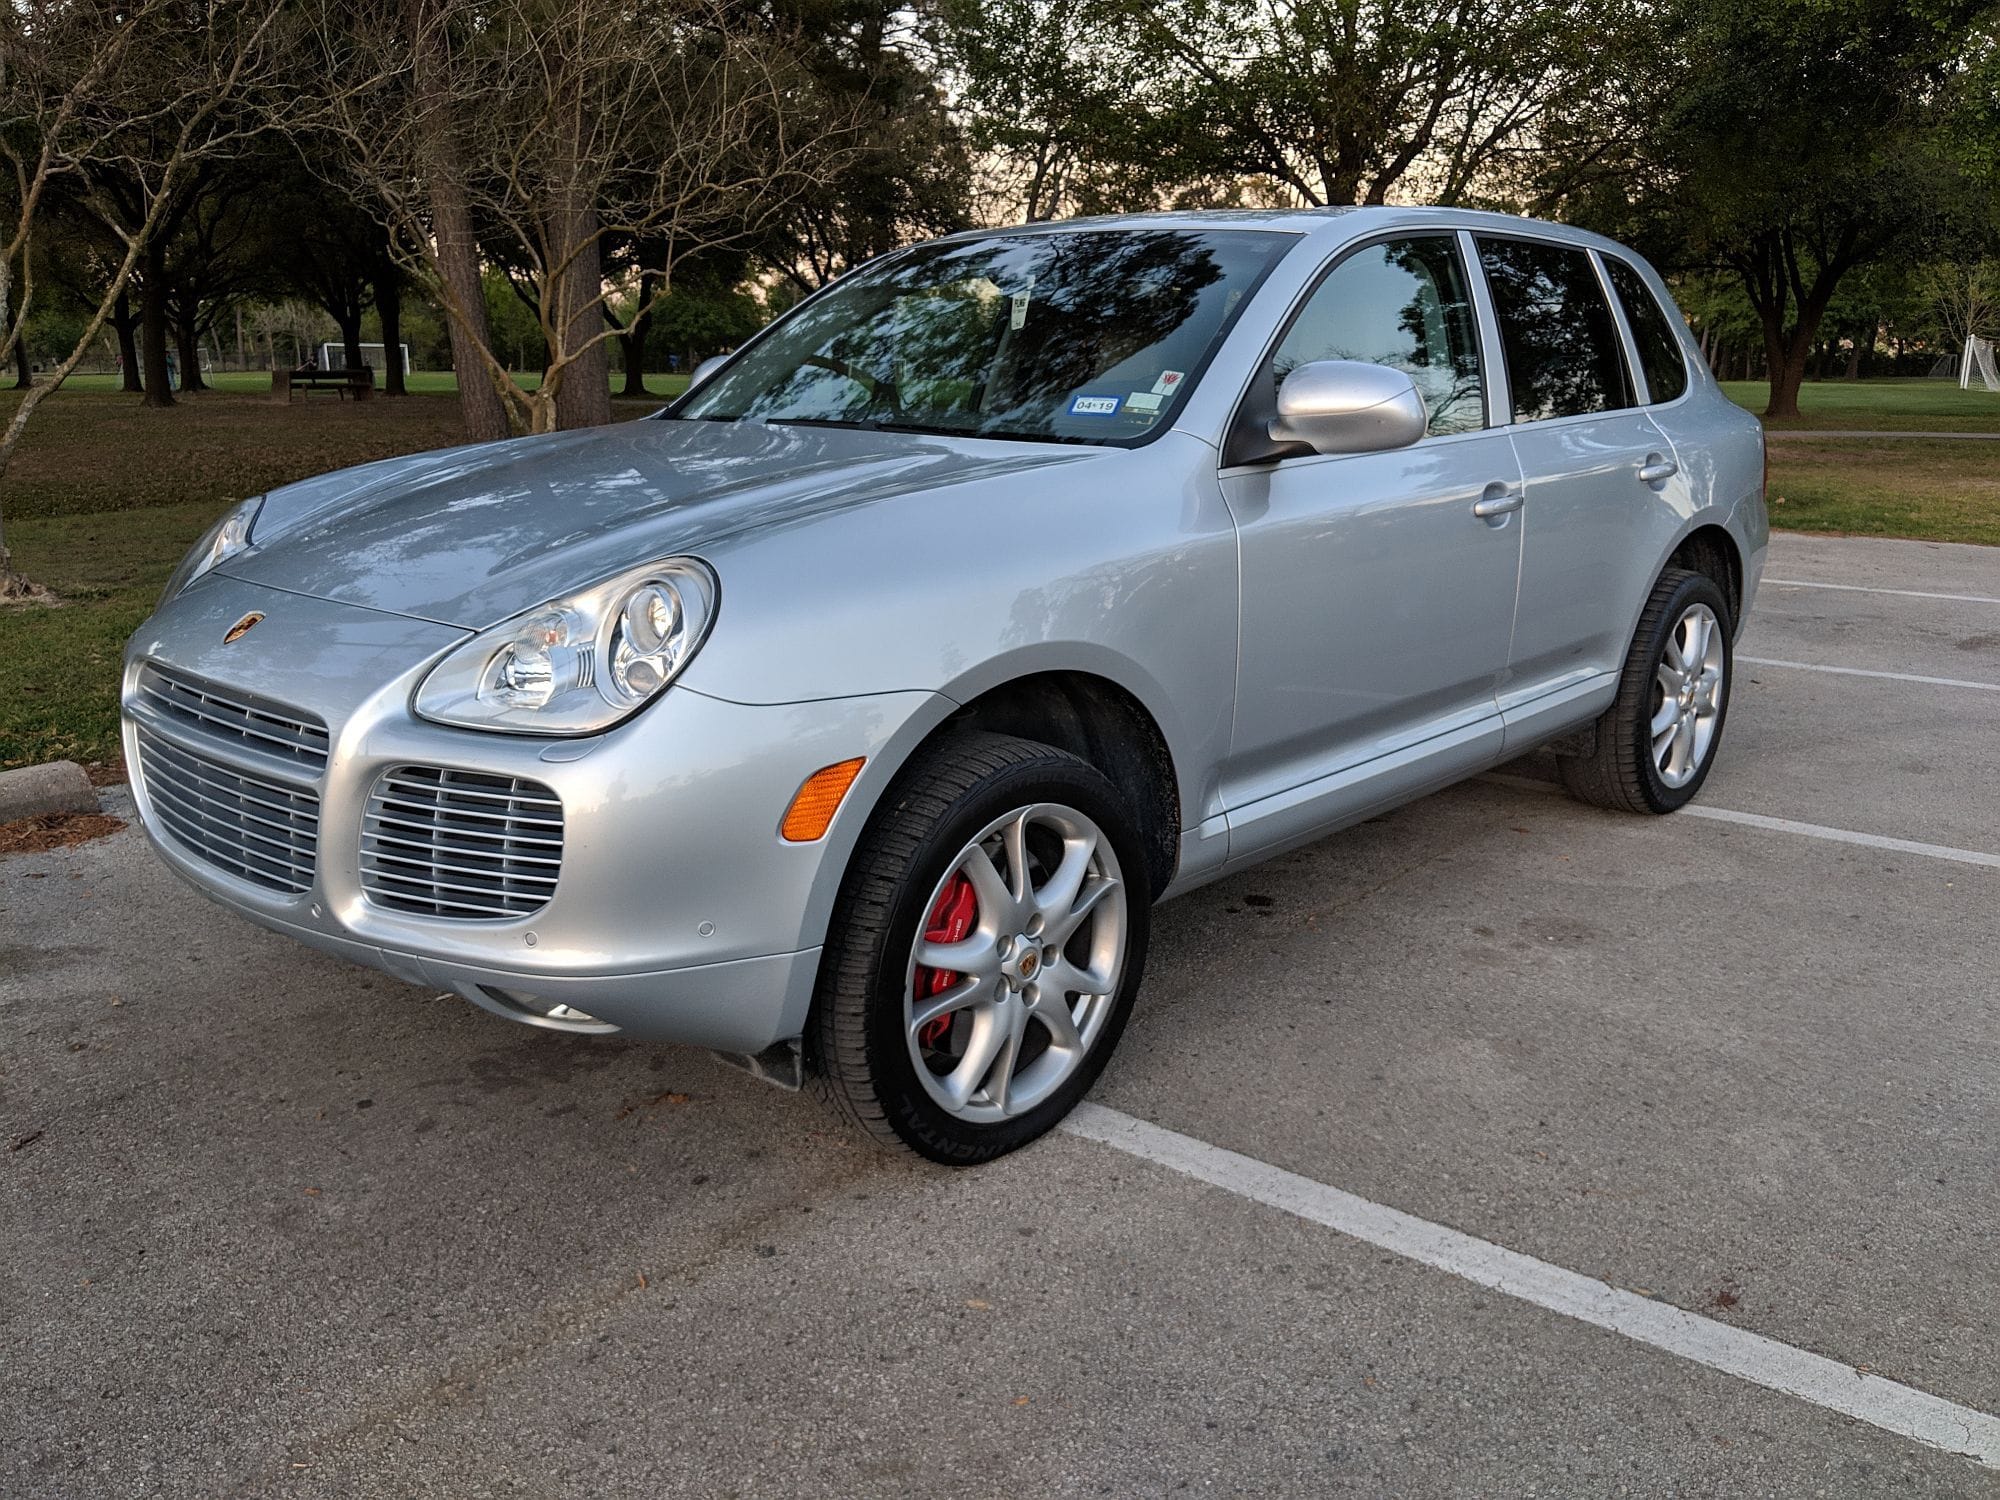 2006 Porsche Cayenne - 40k miles 2006 Cayenne Turbo S CTTS - Used - VIN WP1AC29PX6LA93171 - 39,800 Miles - 8 cyl - AWD - Automatic - SUV - Silver - College Station, TX 77808, United States